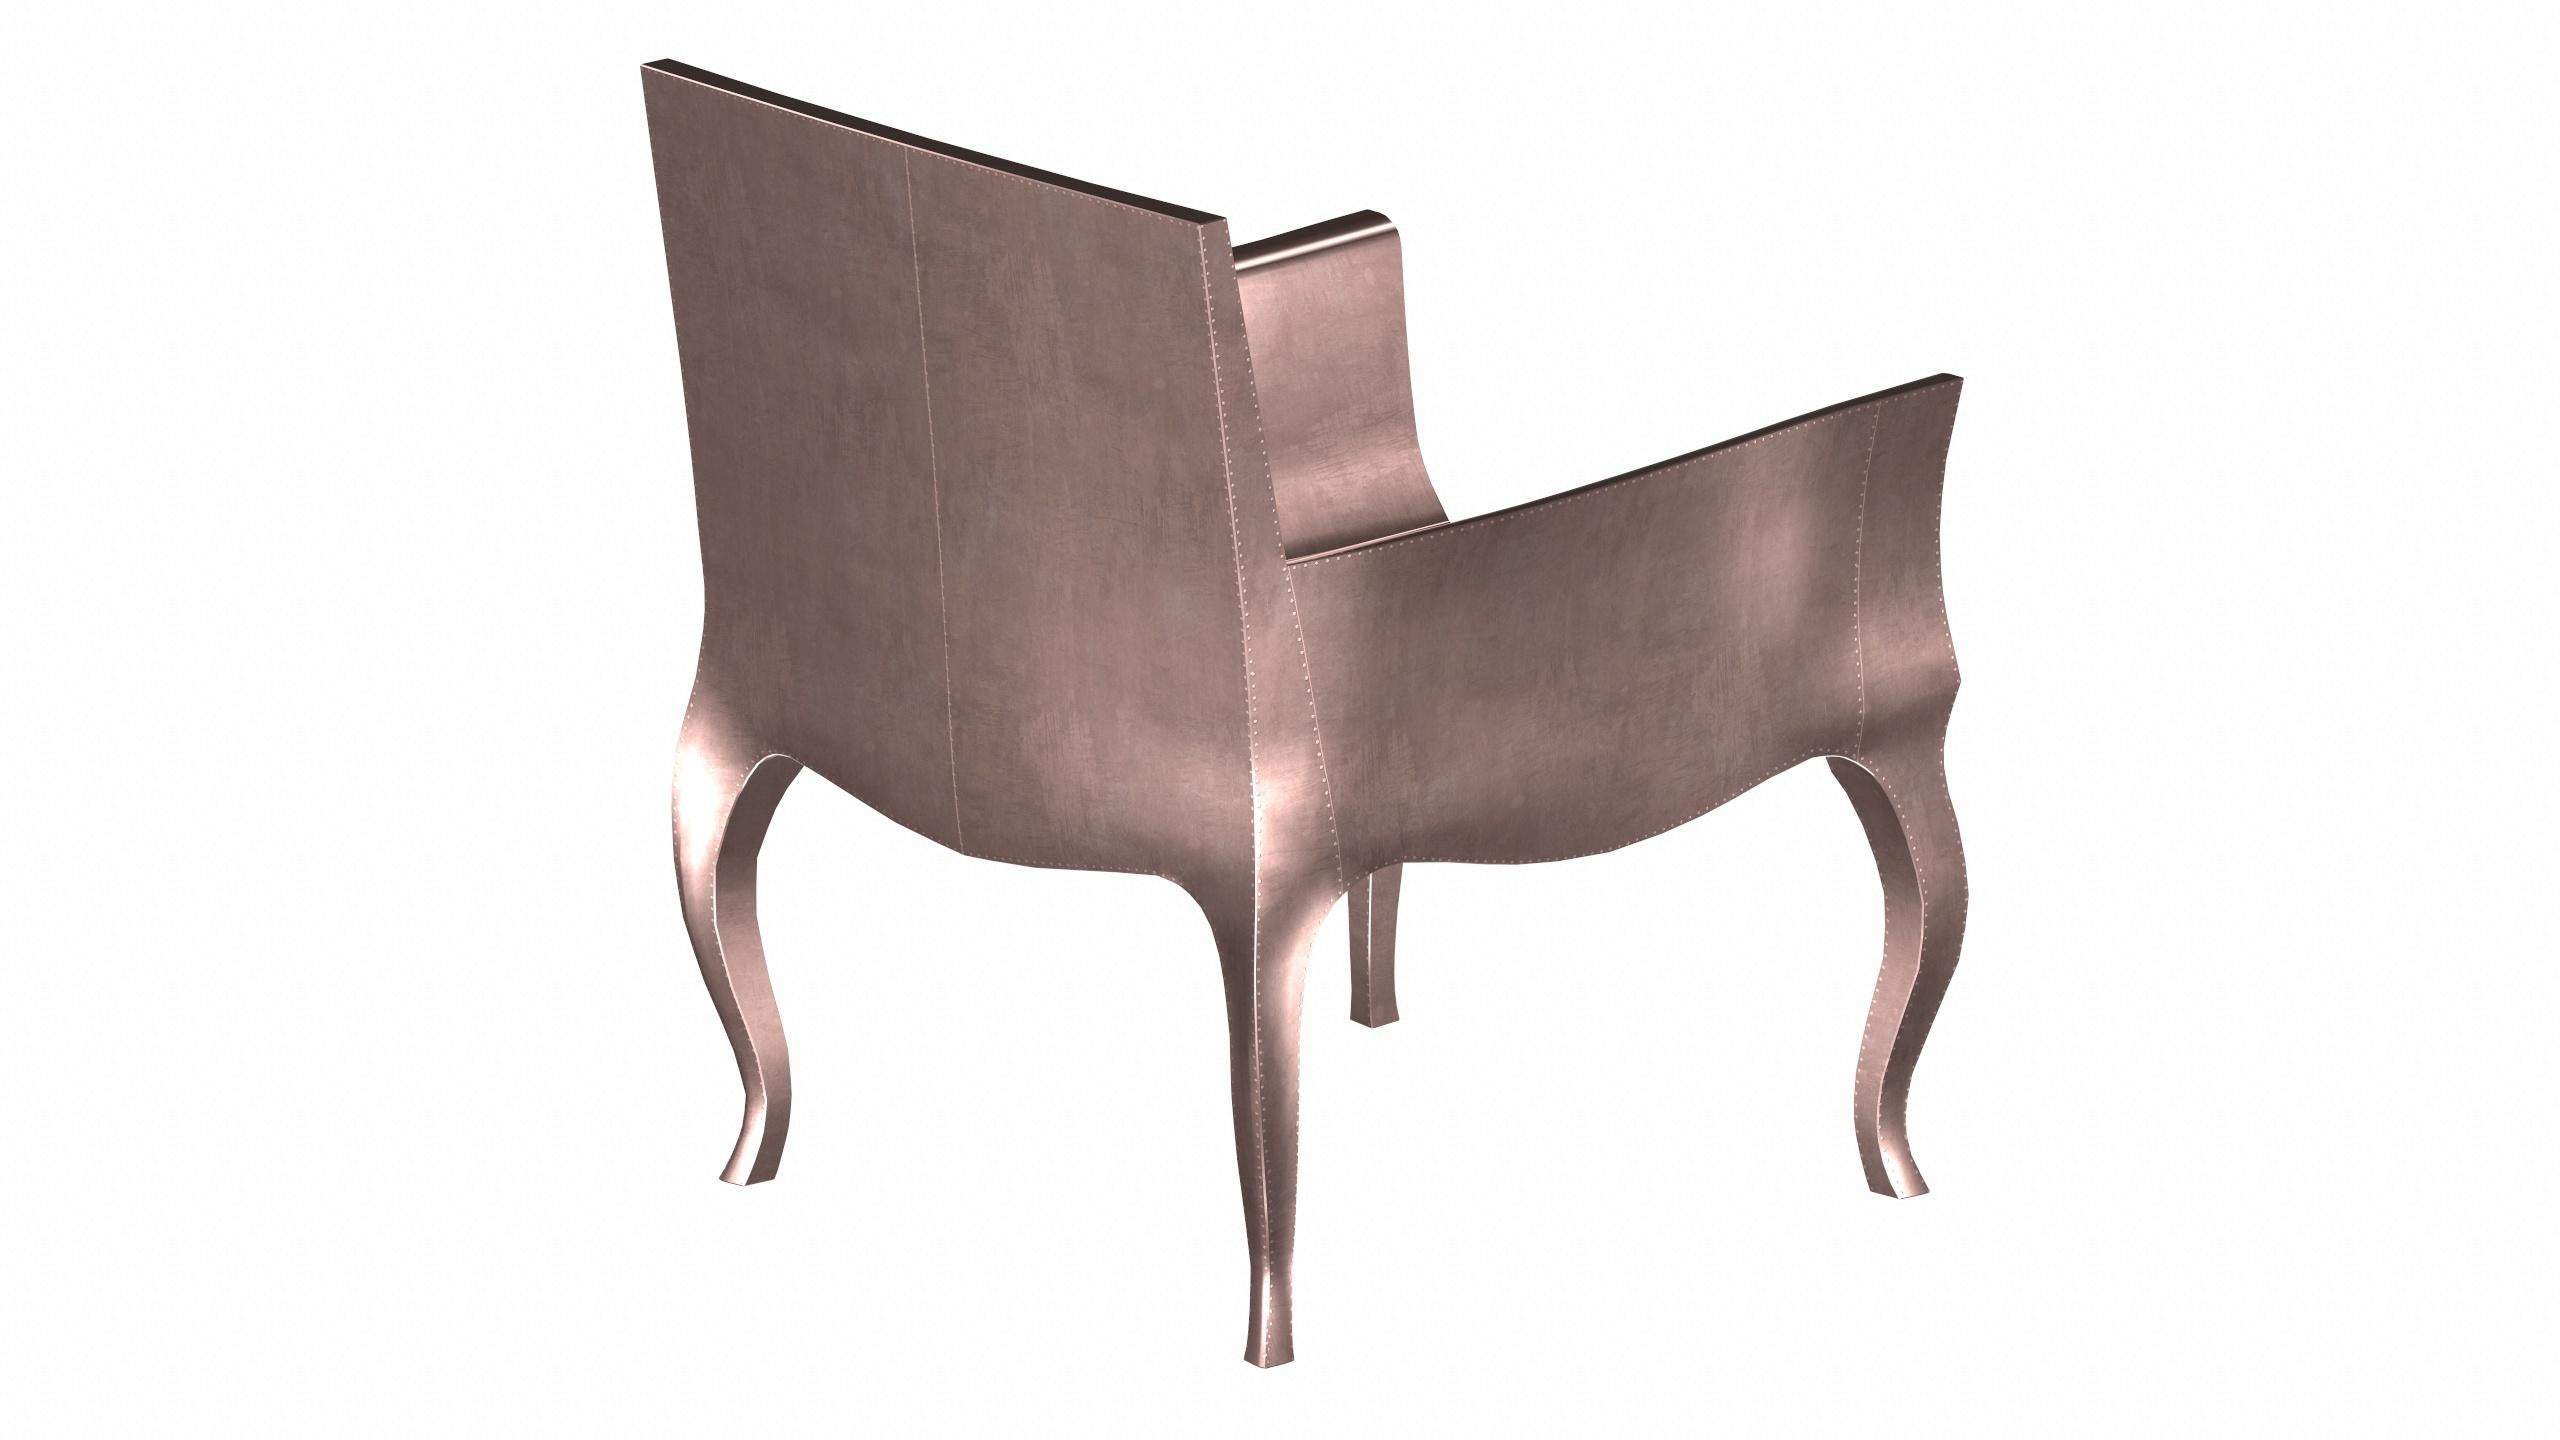 Indian Art Deco Accent Chair in Smooth Copper by Paul Mathieu for S. Odegard For Sale